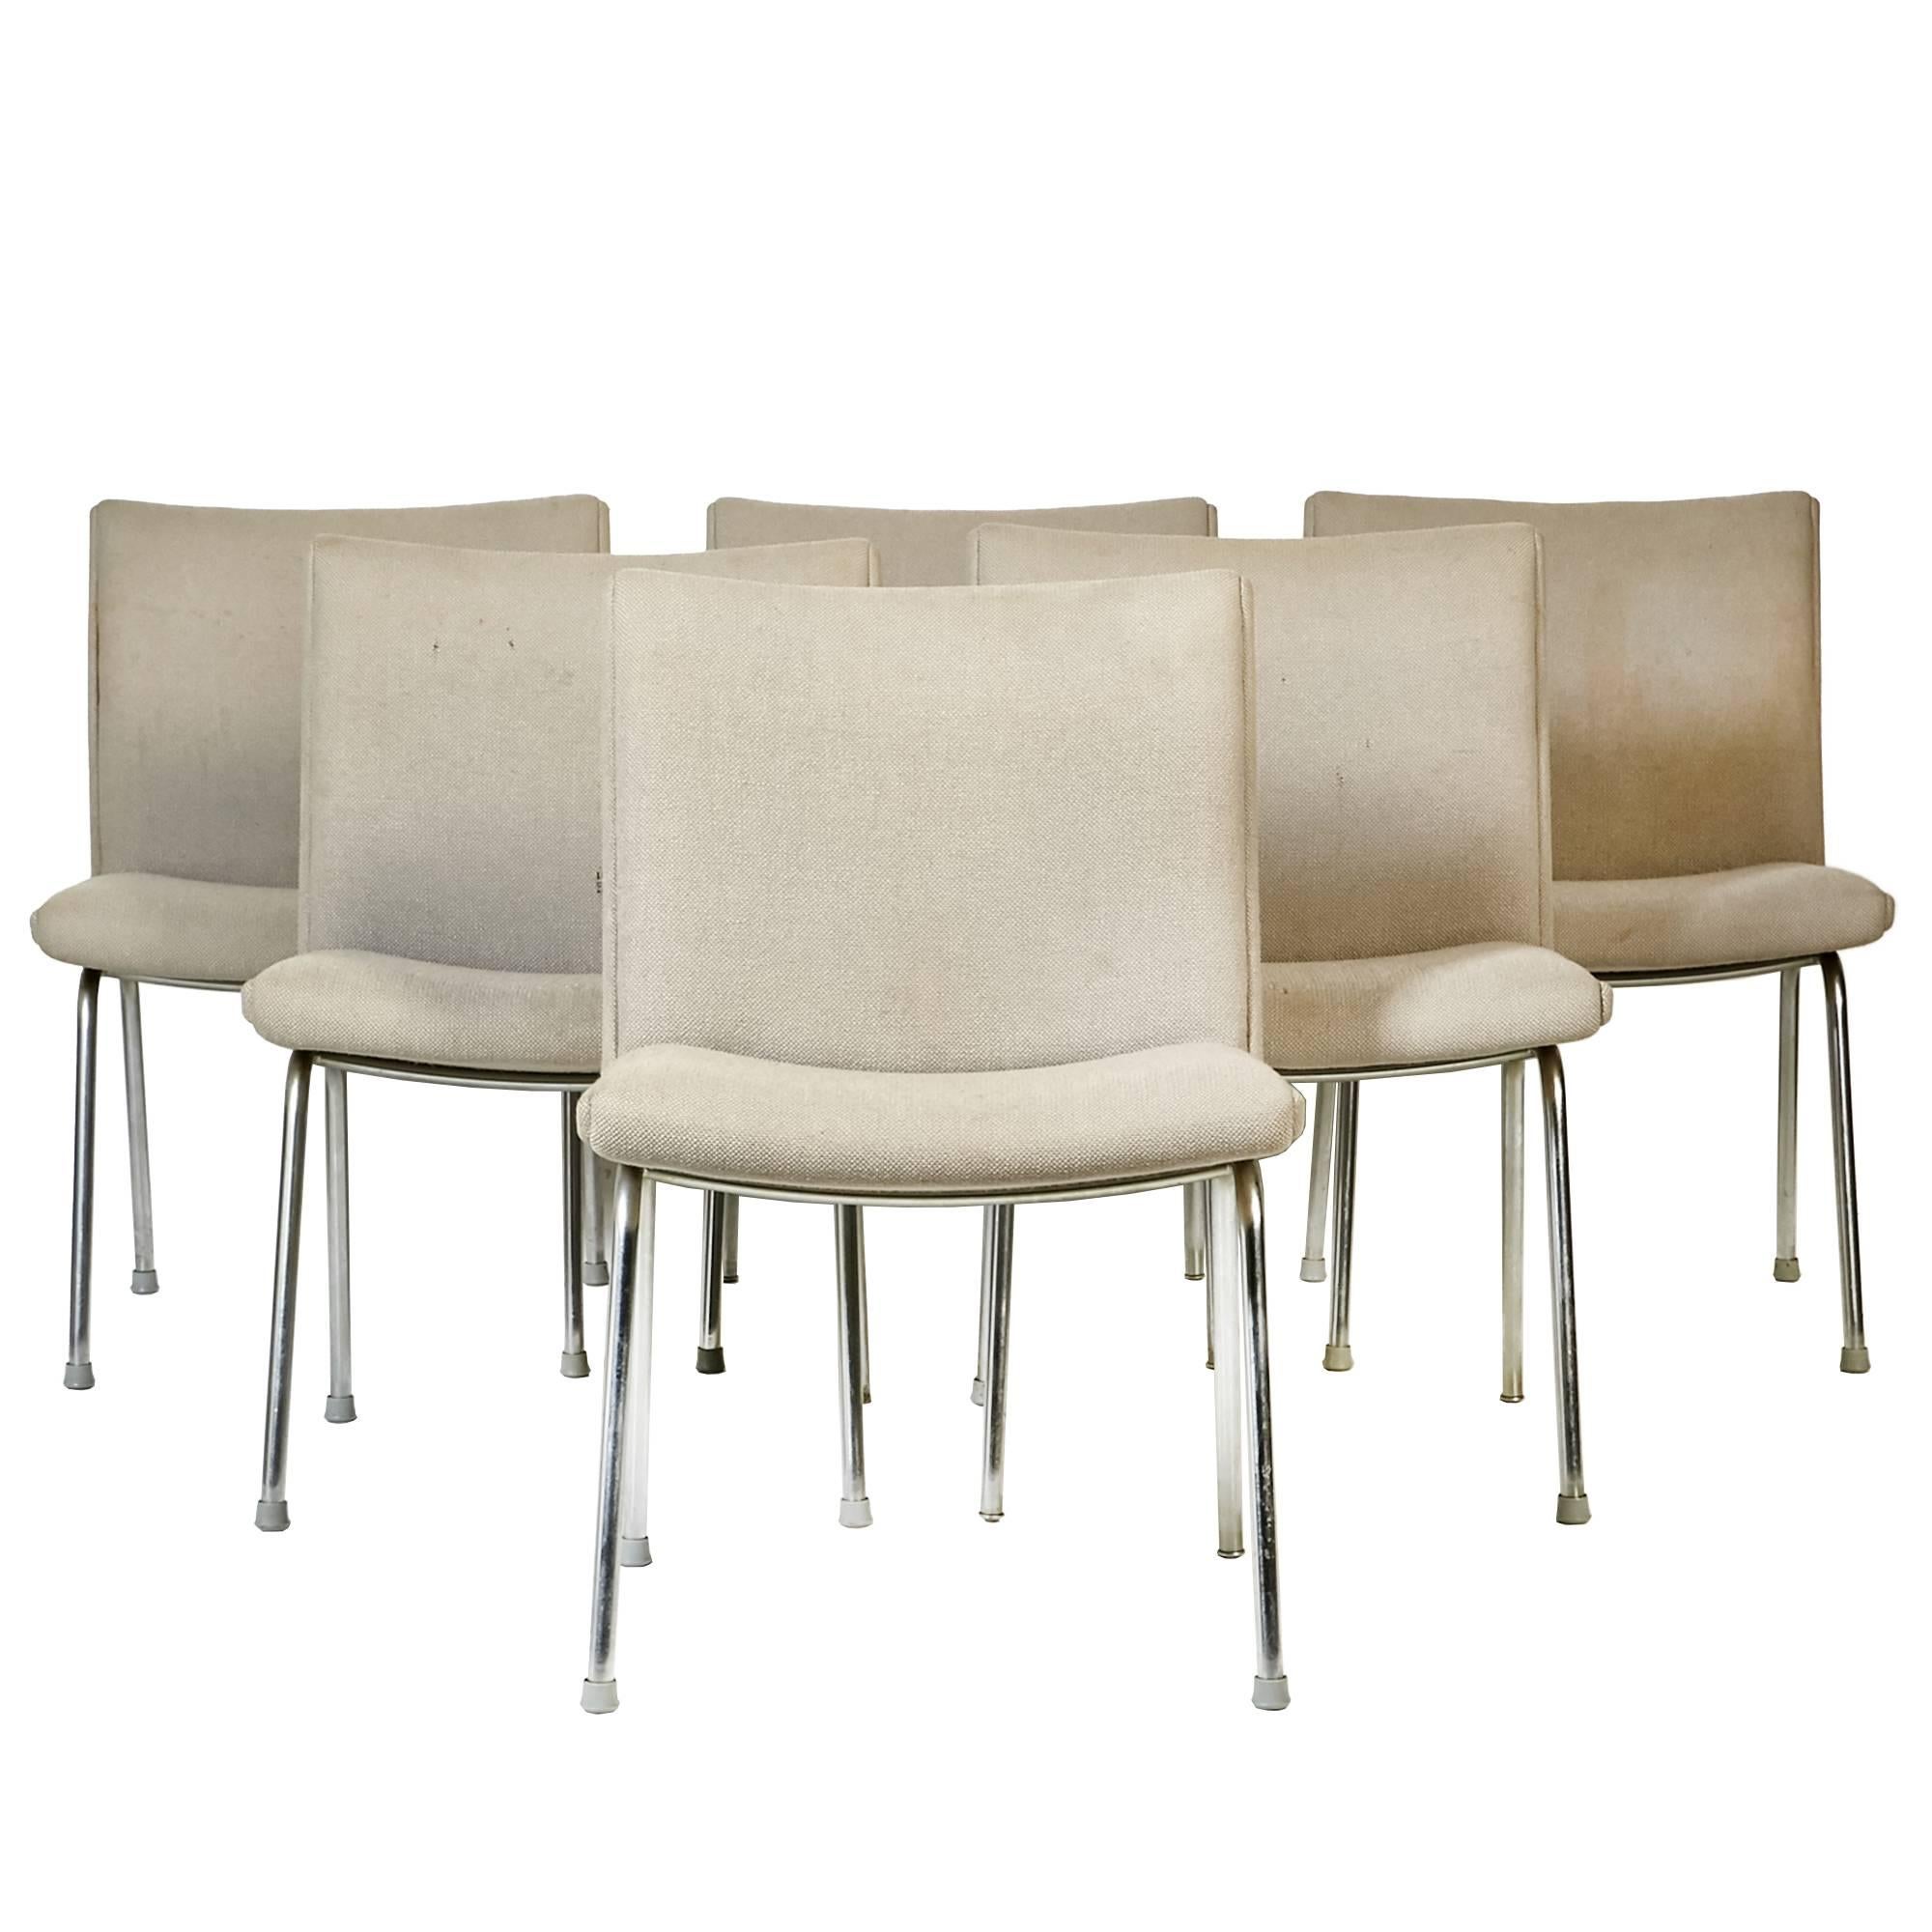 1960s set of six Airport chairs by Hans J. Wegner for Carl Hansen, Denmark. The chairs have the original tweed fabric that needs replacement. Chair frames are sturdy and chrome is in excellent condition with minor wear.